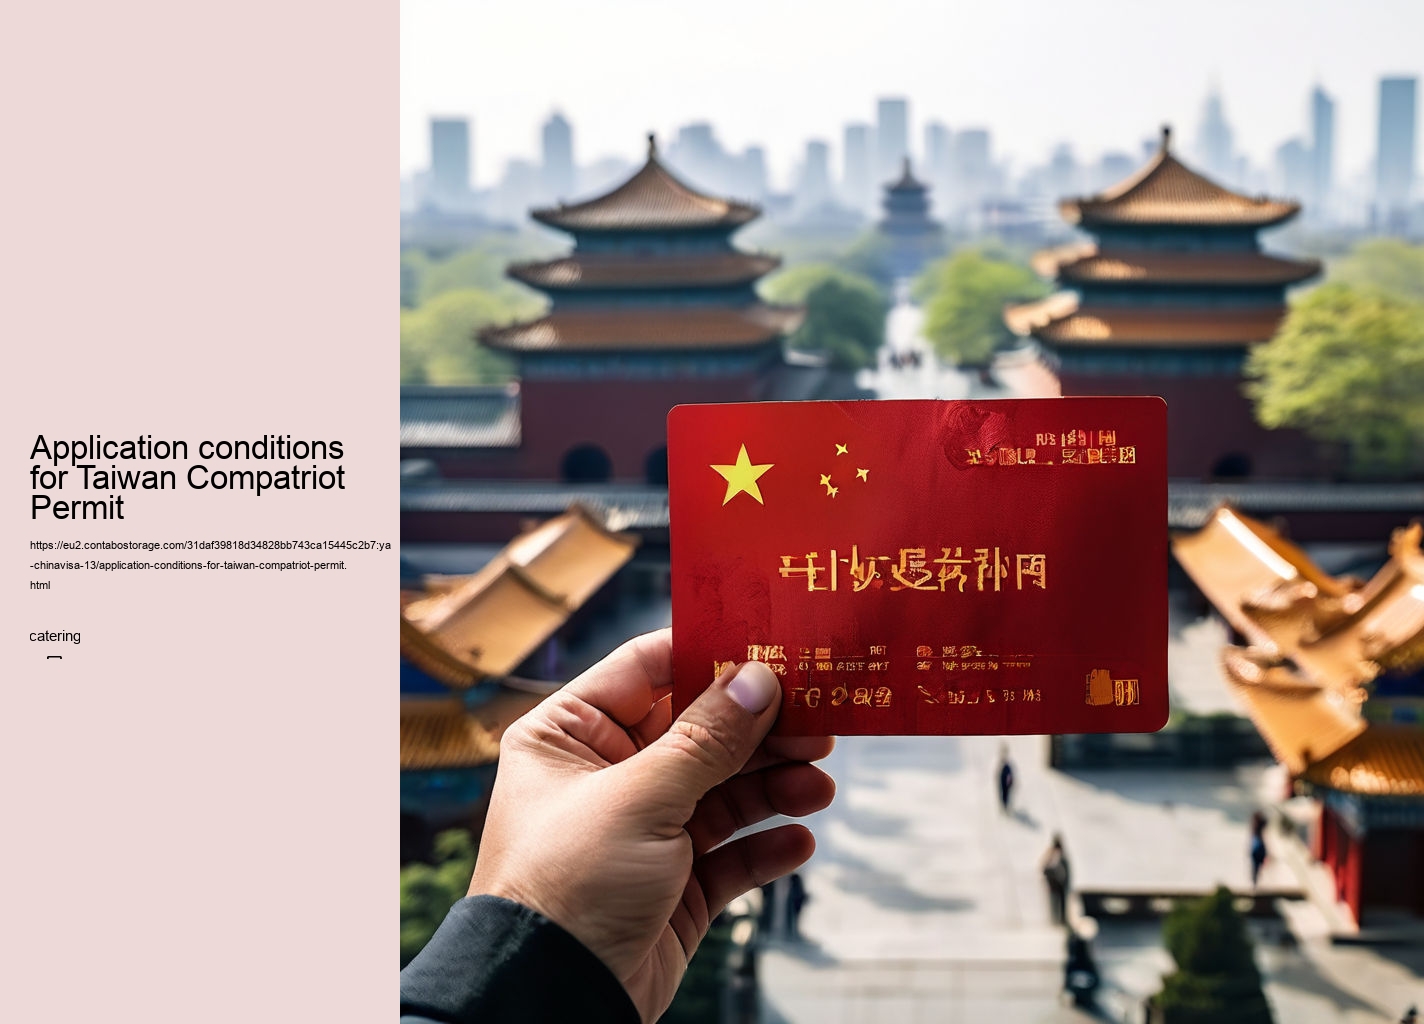 Application conditions for Taiwan Compatriot Permit